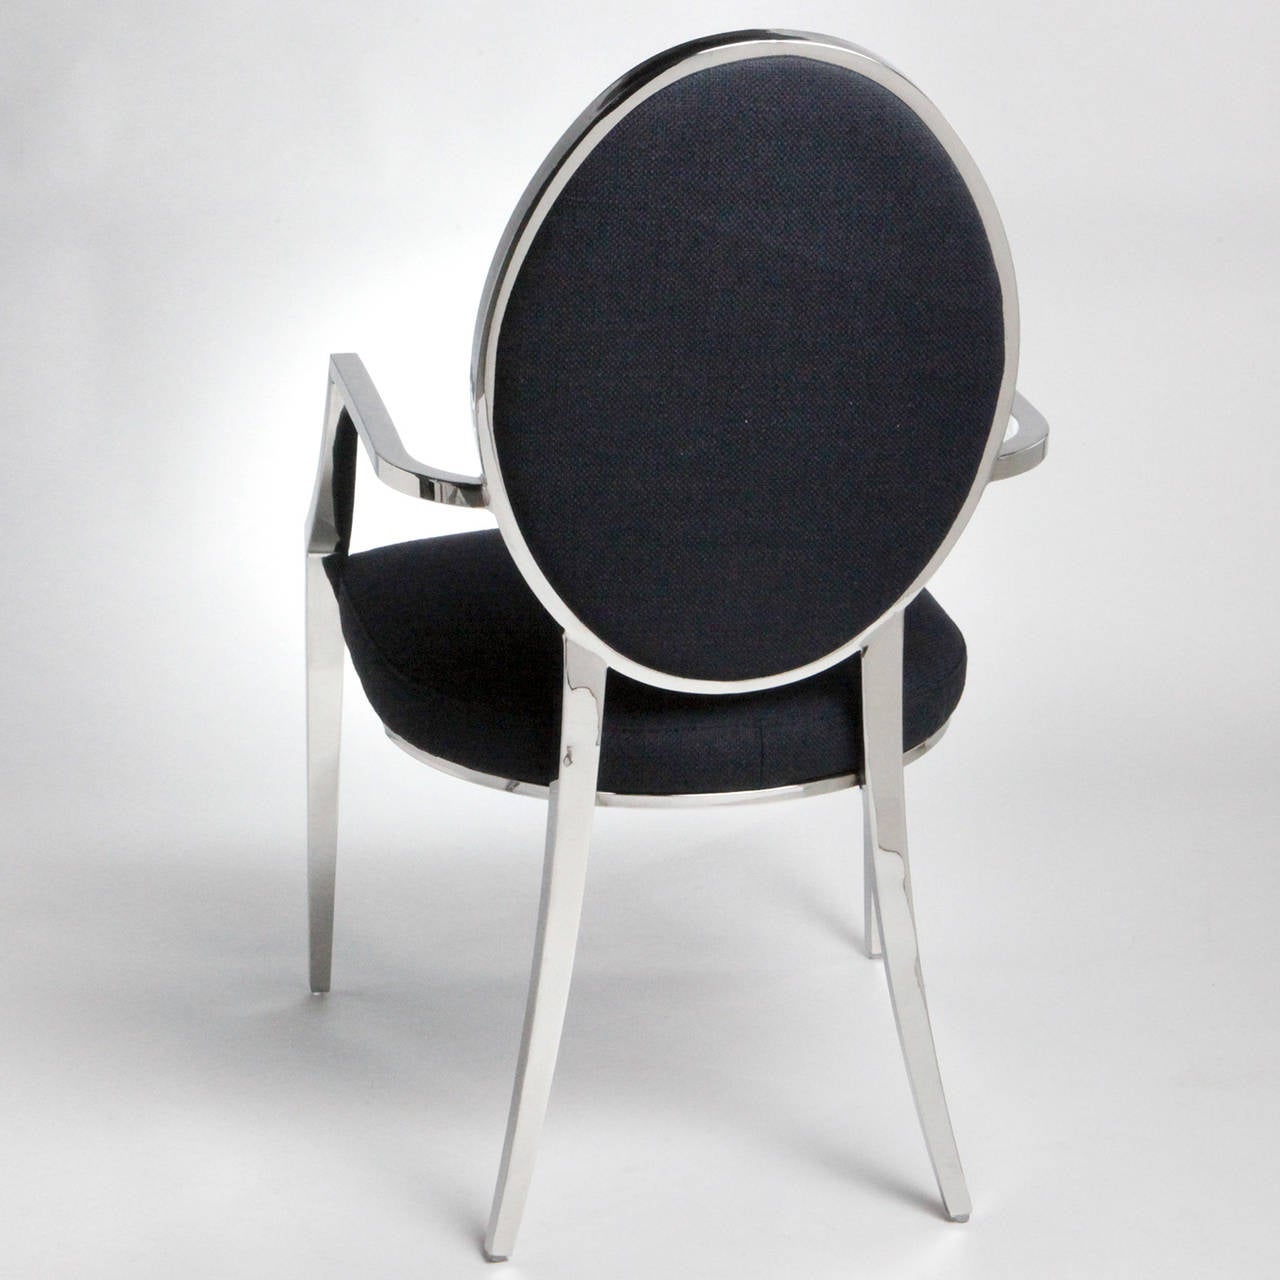 Elegant Classic spoon back chair with a stainless steel frame. Black fabric seat and tufted fabric back.